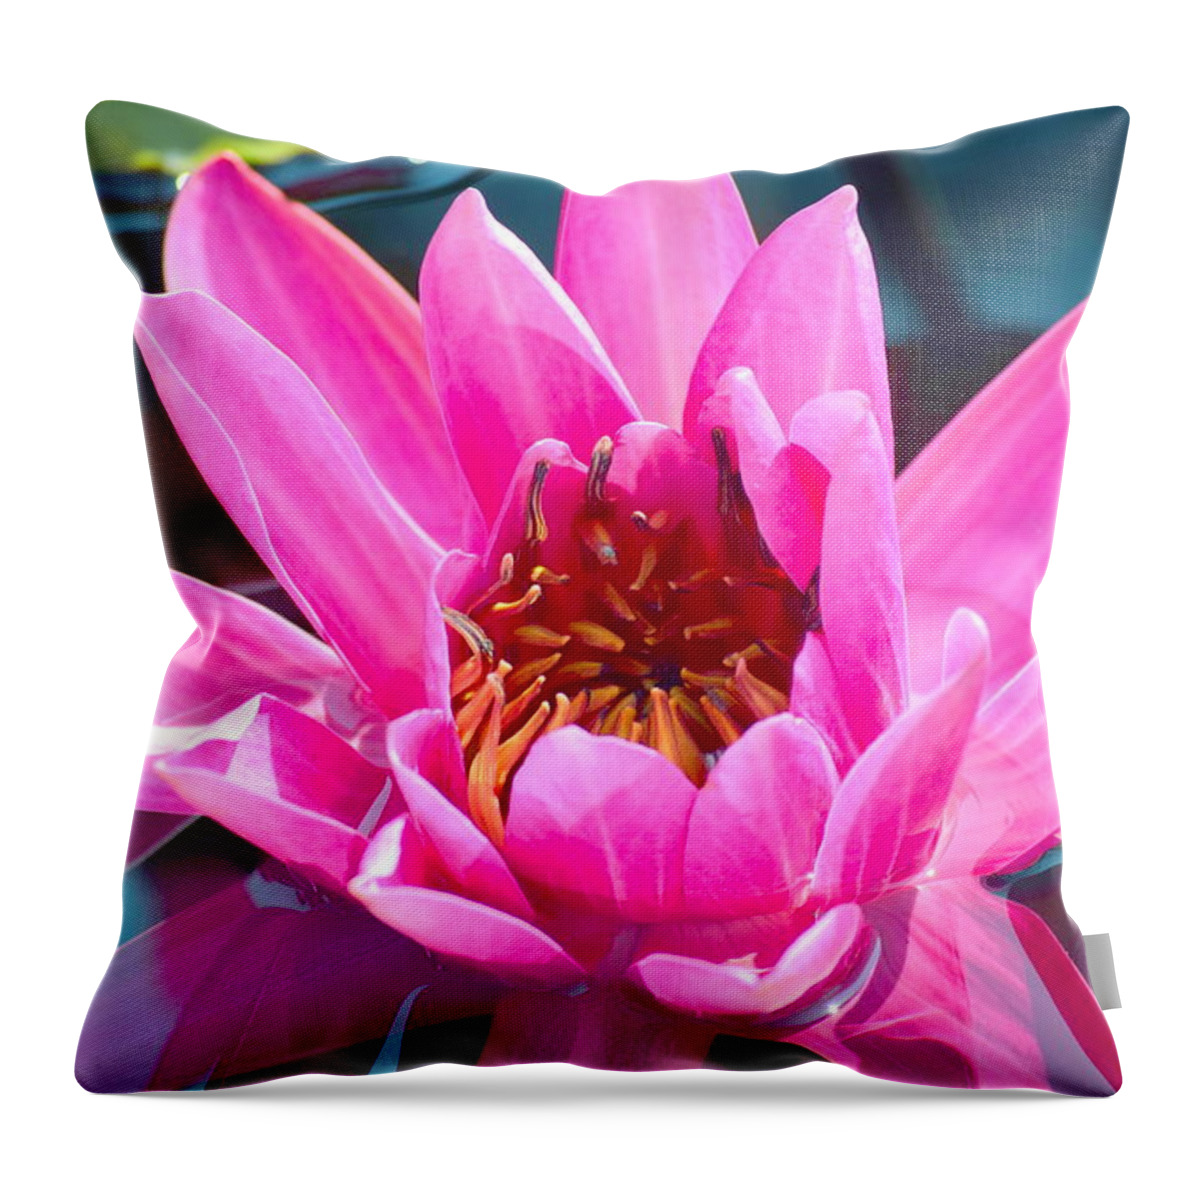 Lily Throw Pillow featuring the photograph Pink Wonder by Deborah Crew-Johnson